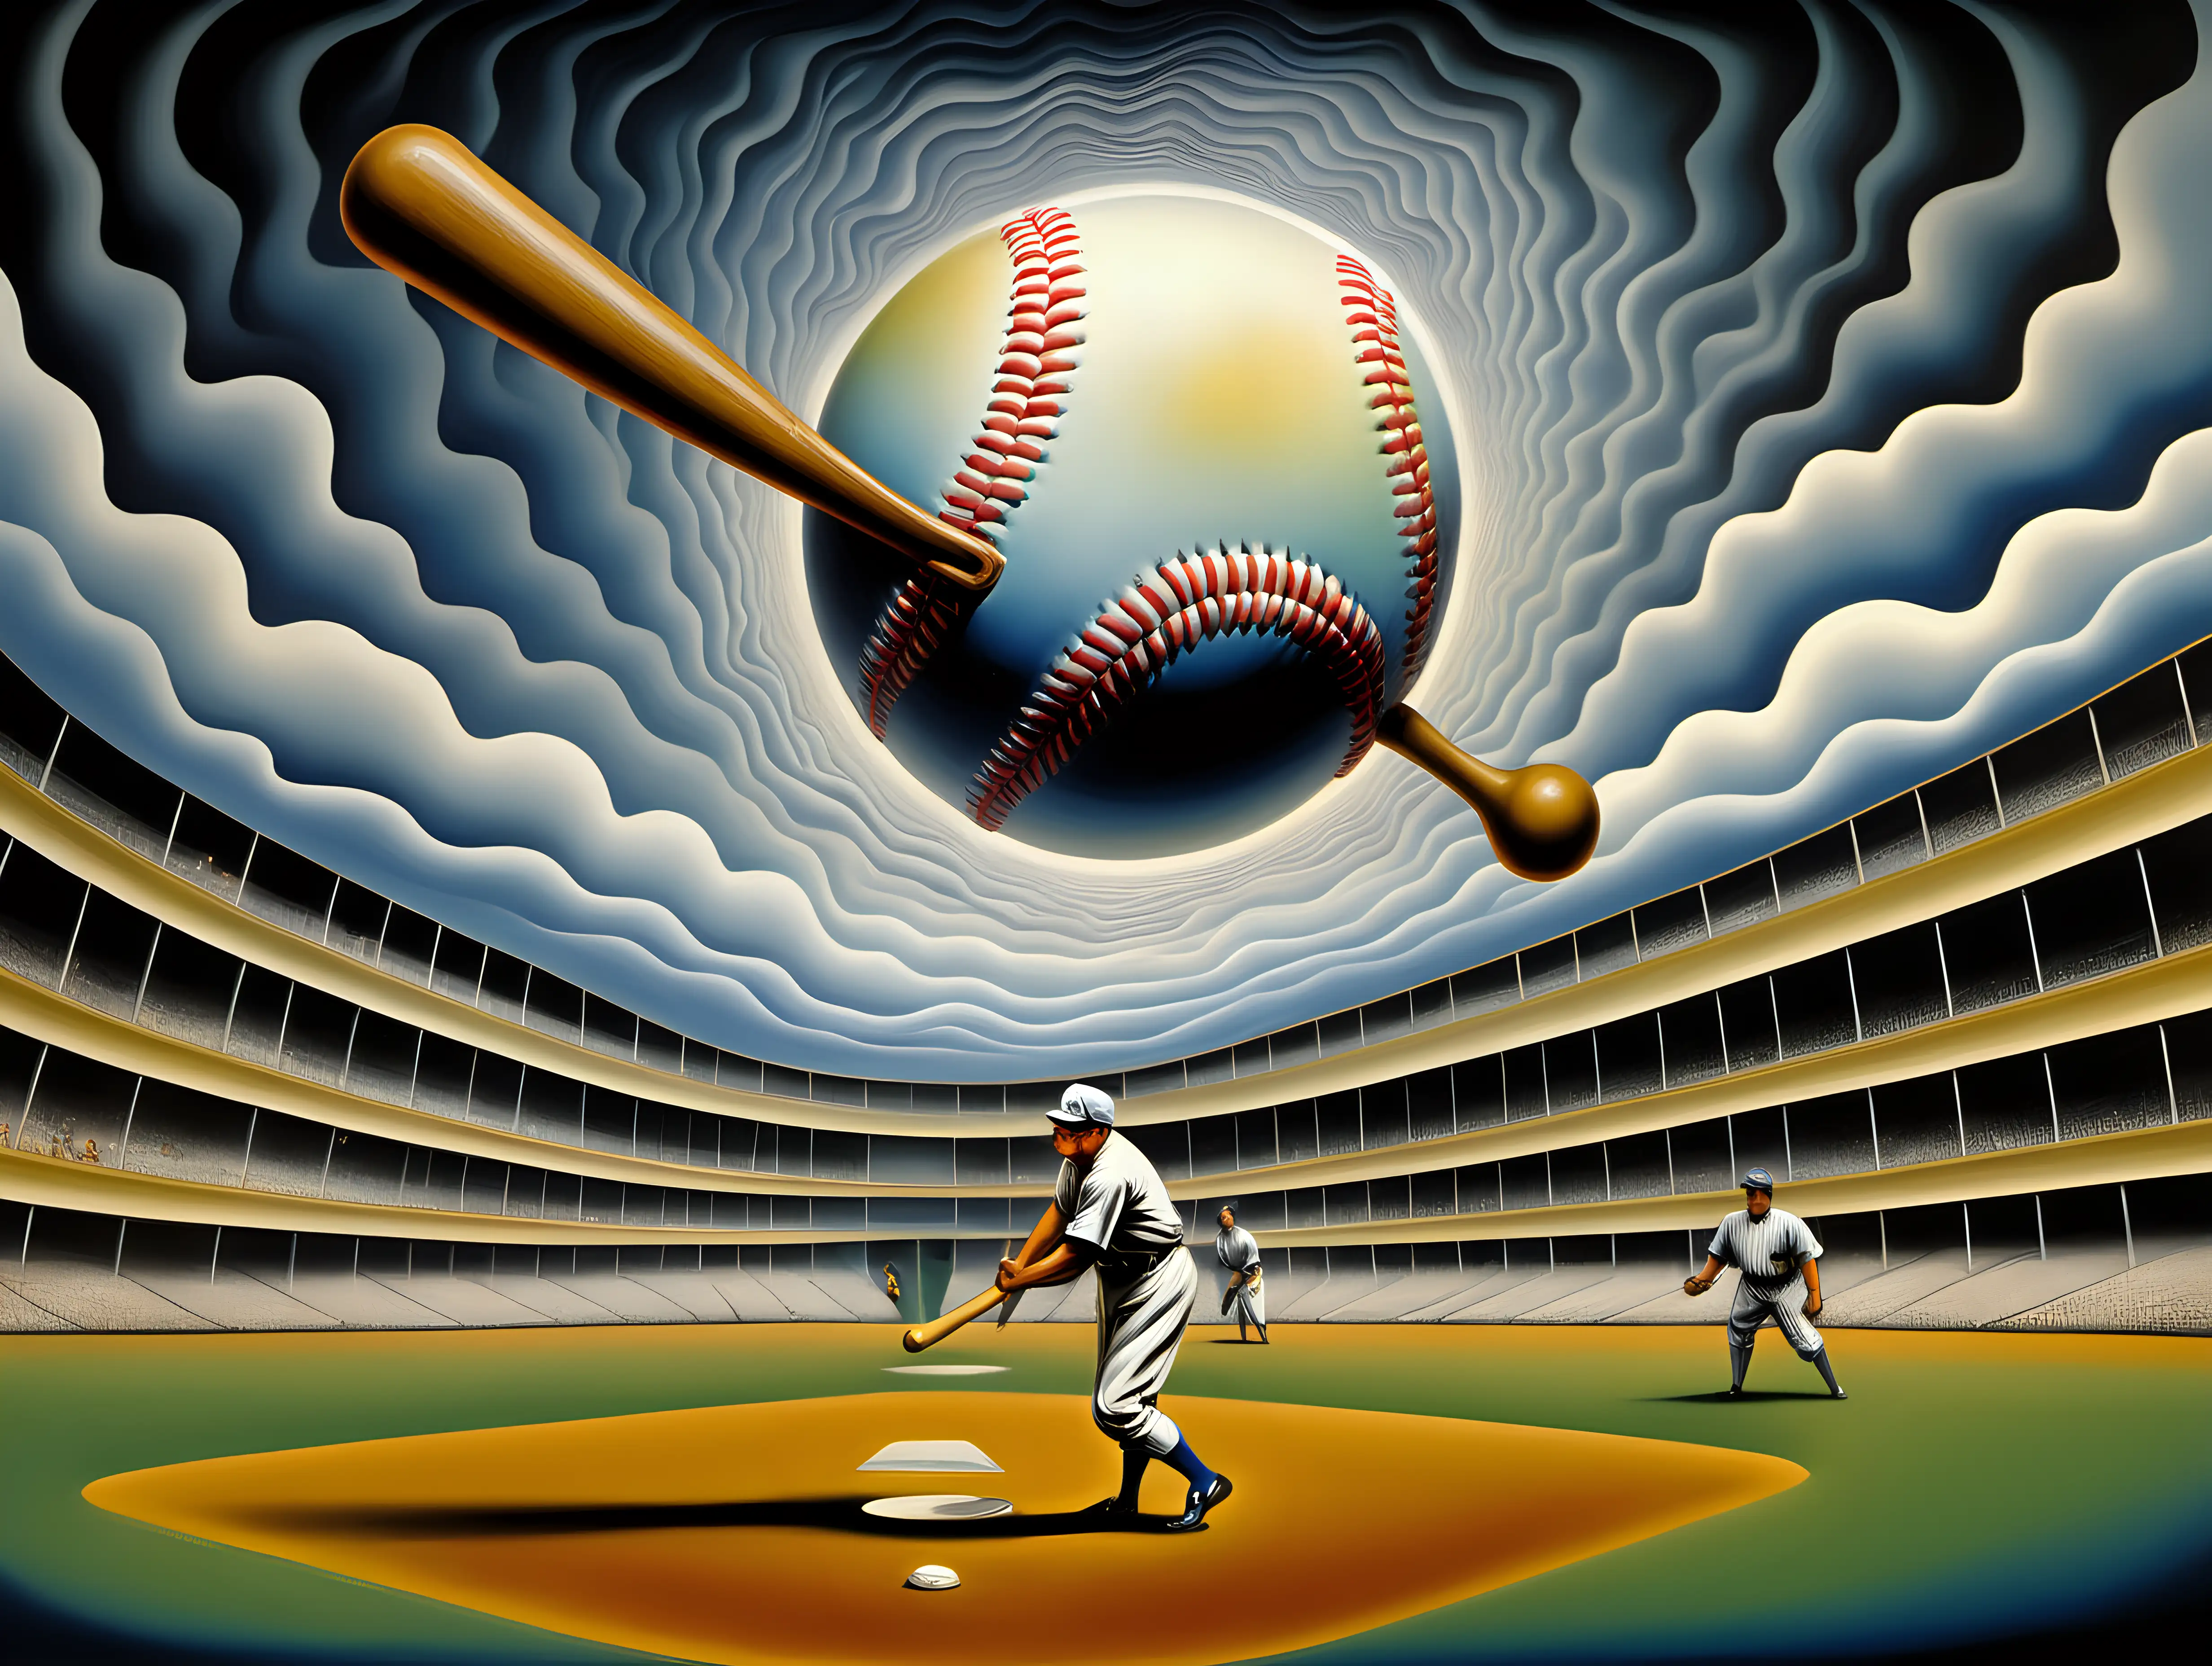 my mind on lsd while Babe Ruth is playing baseball in style of surrealism and abstract by Dali